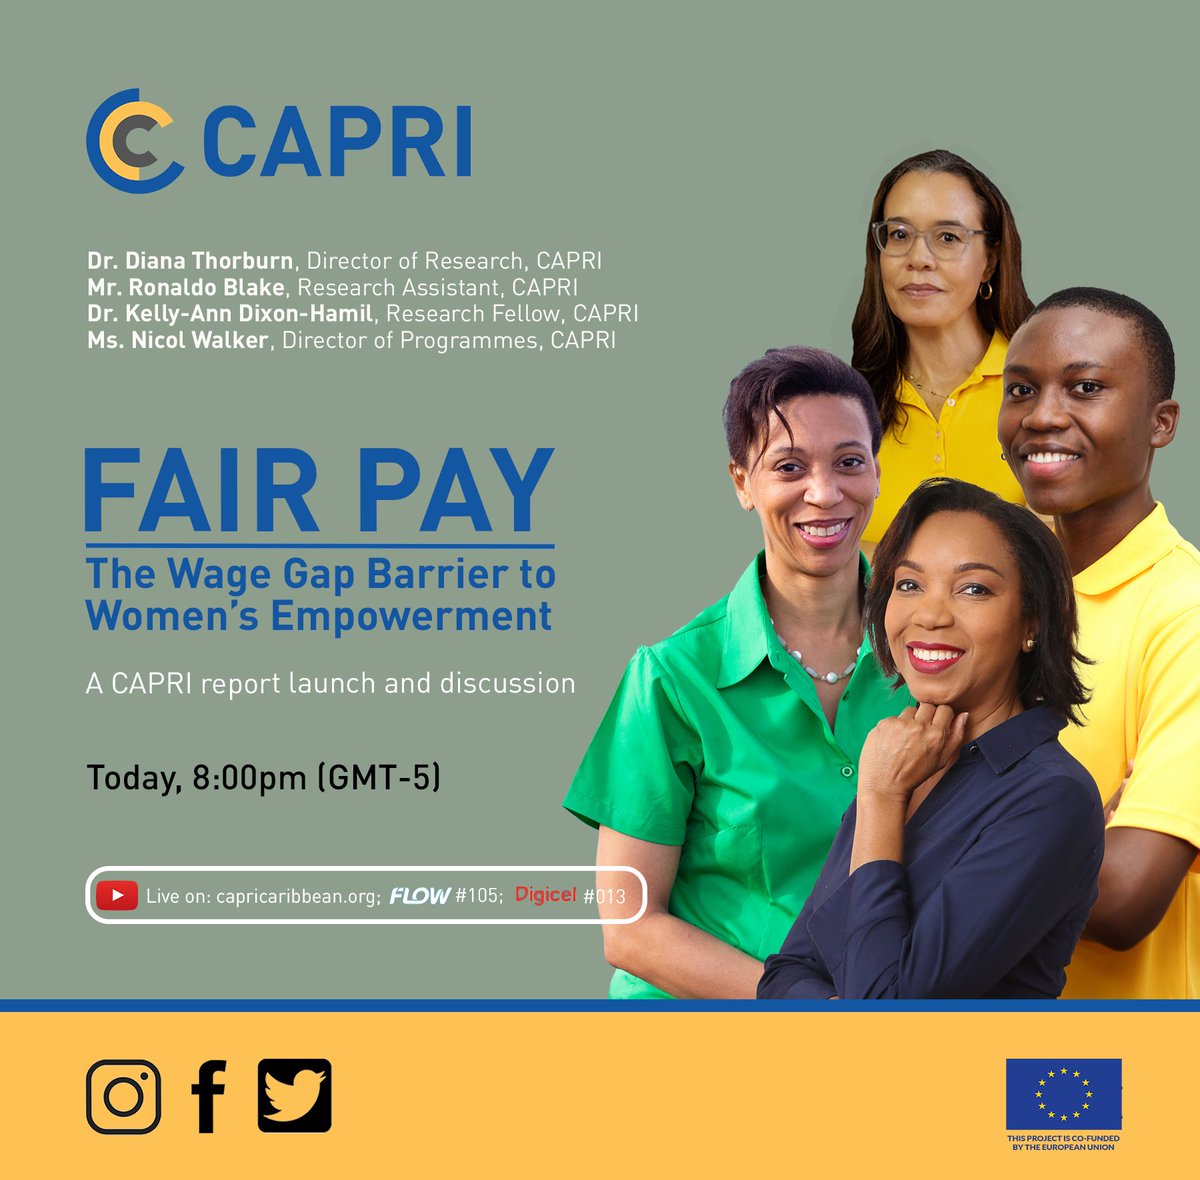 Get ready! 

Our launch of 'Fair Pay: The Wage Gap Barrier to Women's Empowerment' is happening in less than 2 hours! Join us for an in-depth look at the latest report on fair pay and join in on the discussion by submitting your questions via Slido! #FairPay #LaunchDay